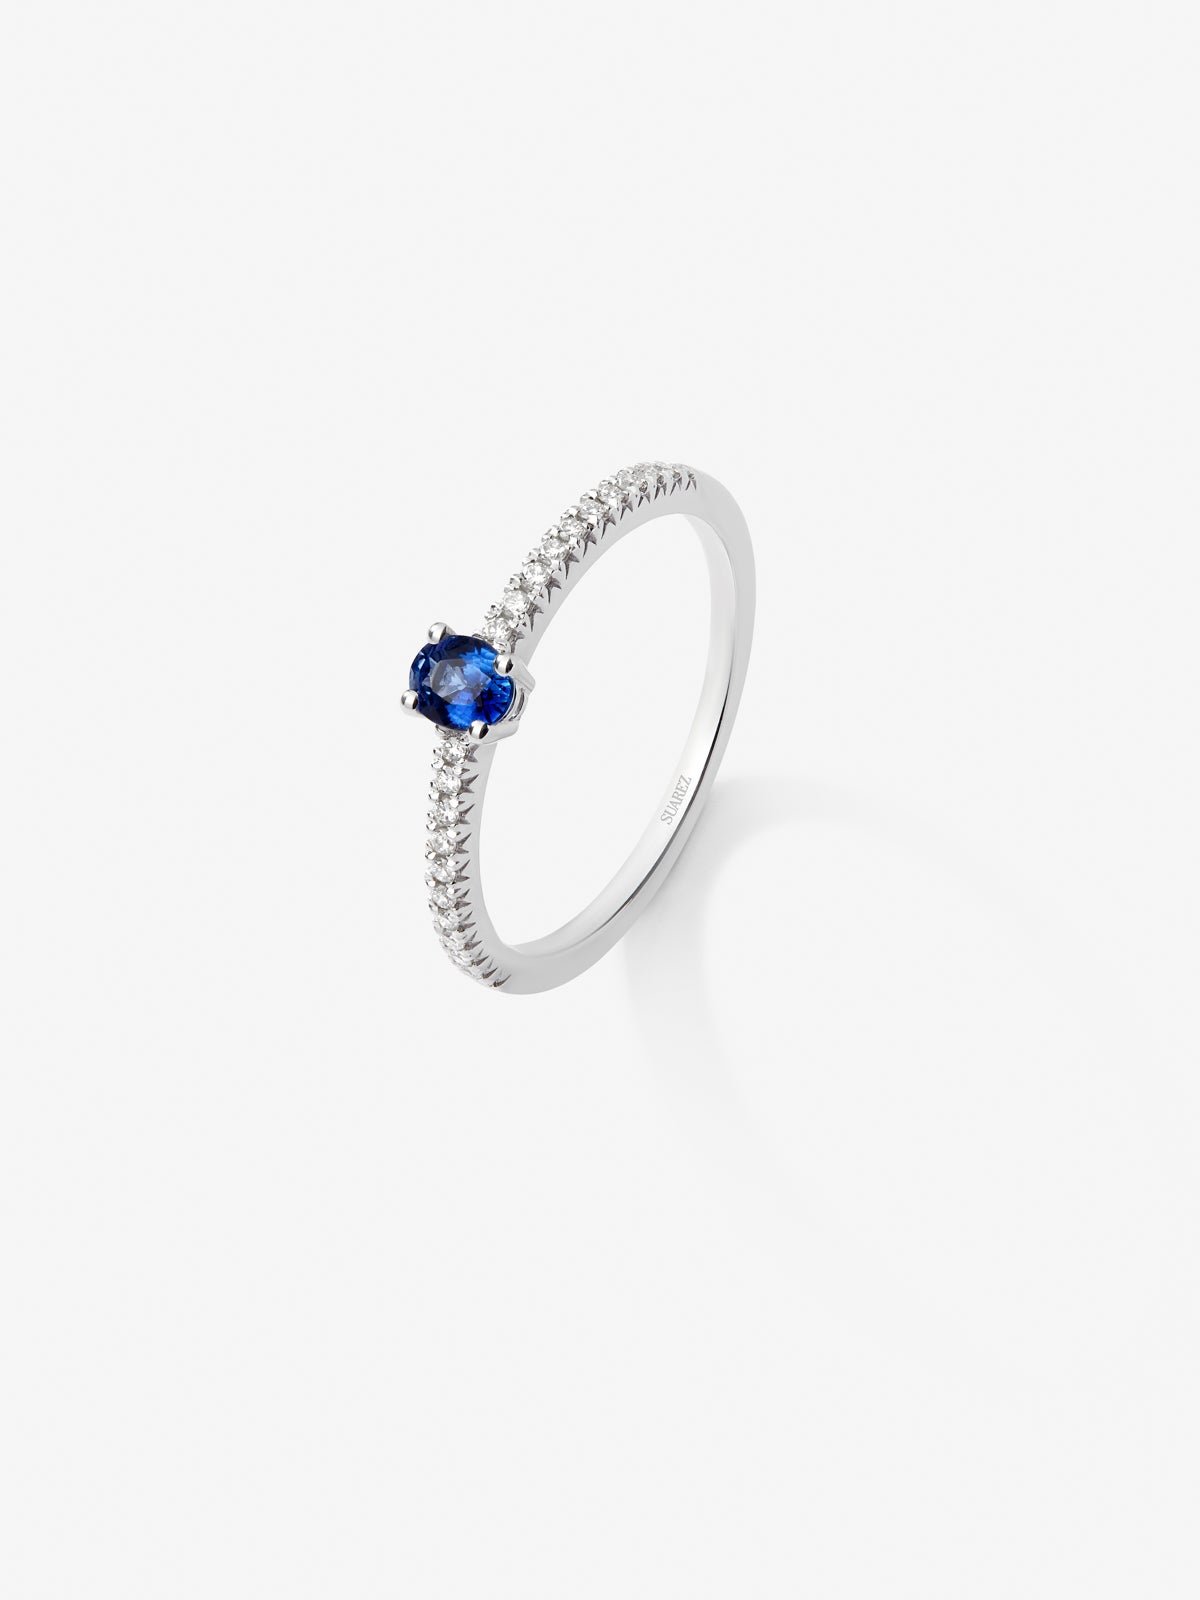 18K white gold solitaire ring with central oval-cut blue sapphire of 0.2 cts and arm of 22 brilliant-cut diamonds with a total of 0.09 cts